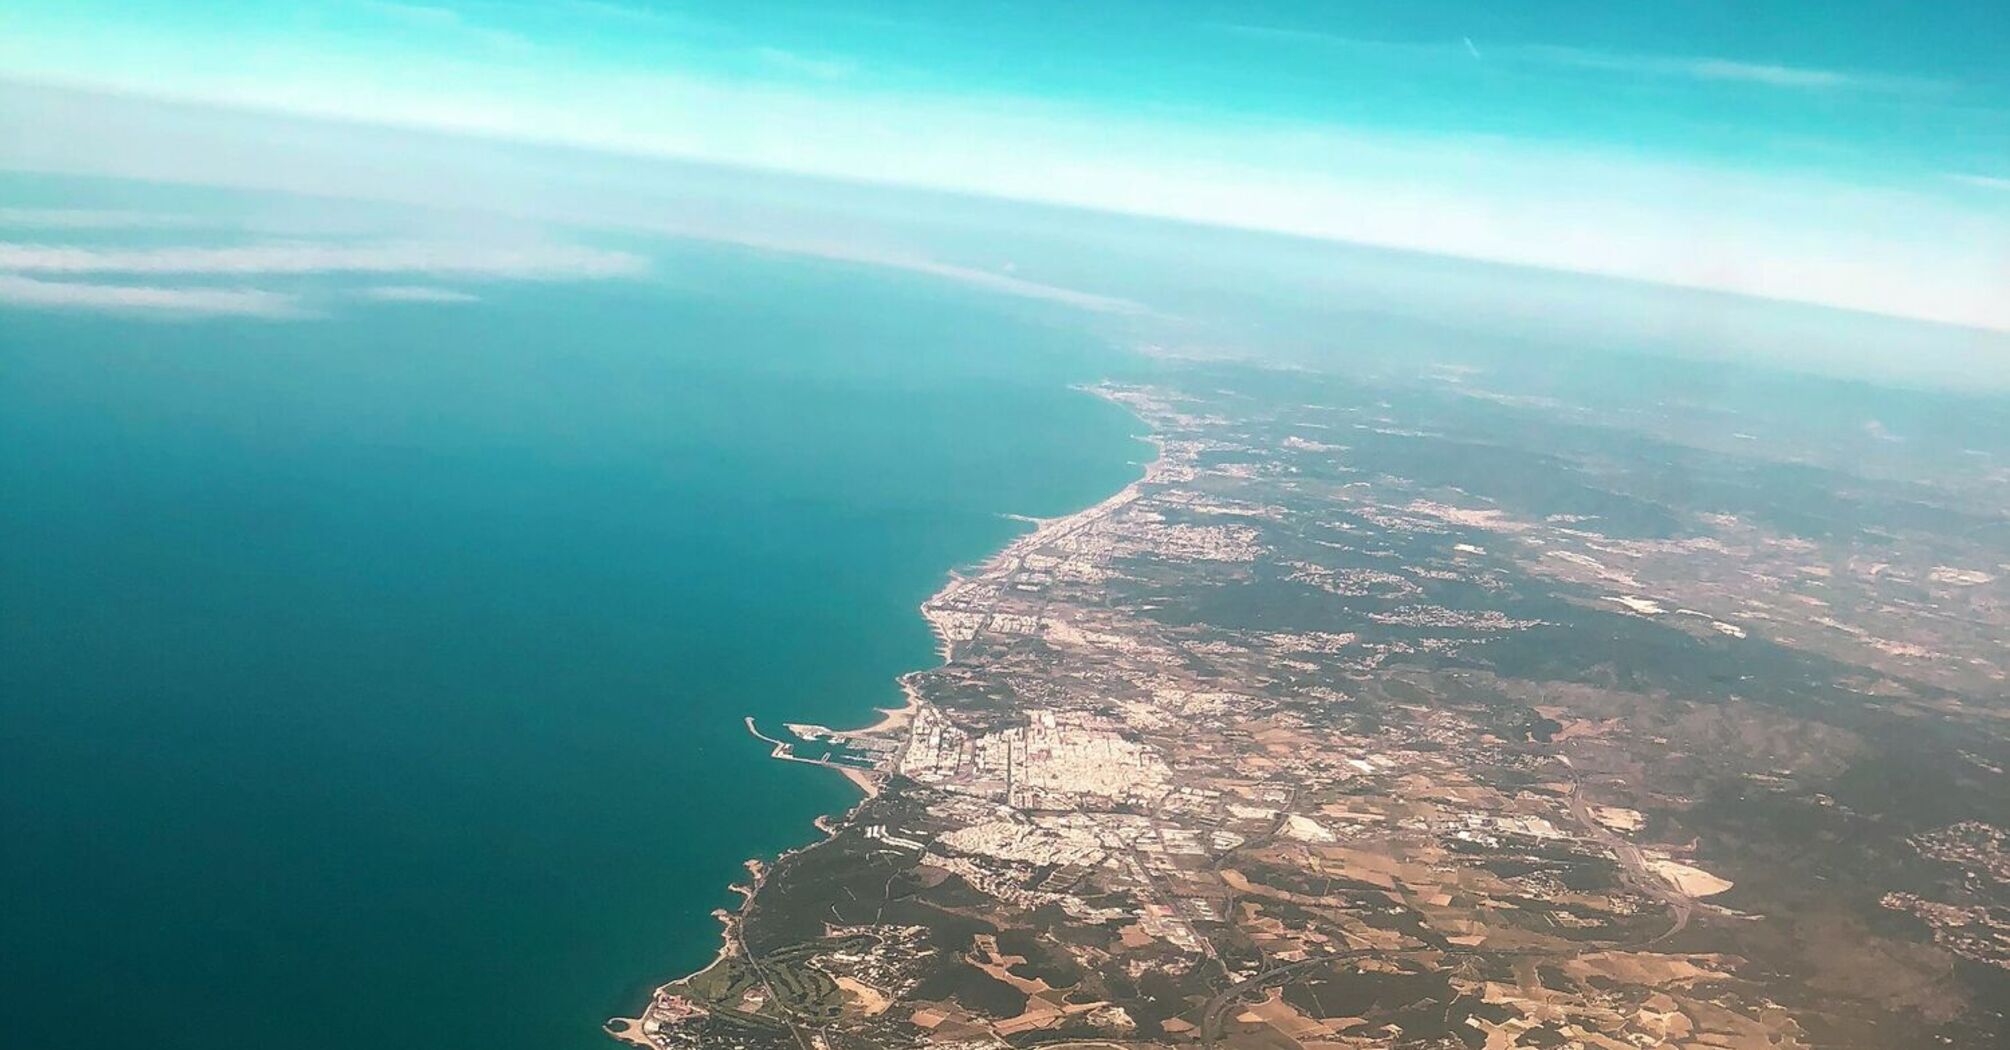 Aerial view of the coastline of Barcelona, Spain, showcasing the cityscape adjacent to the clear blue waters of the Mediterranean Sea